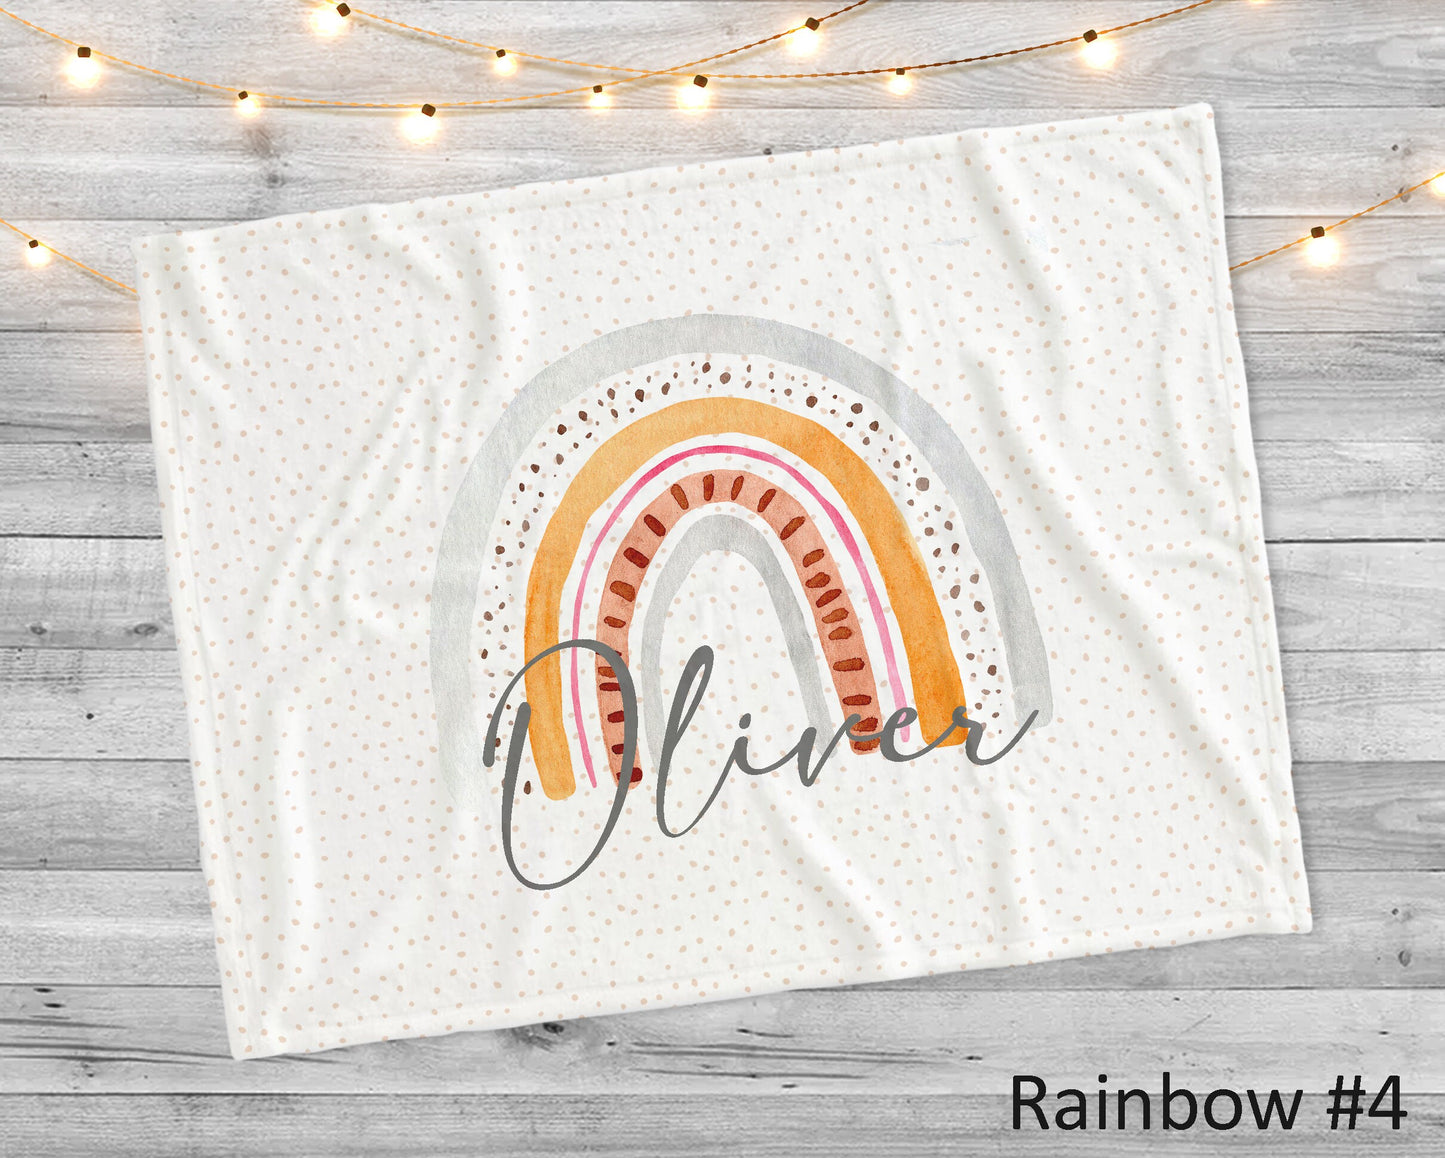 Watercolor Paint  Rainbow with personalize name blanket, Minky or Sherpa custom blanket, Baby blanket, birthday gift idea